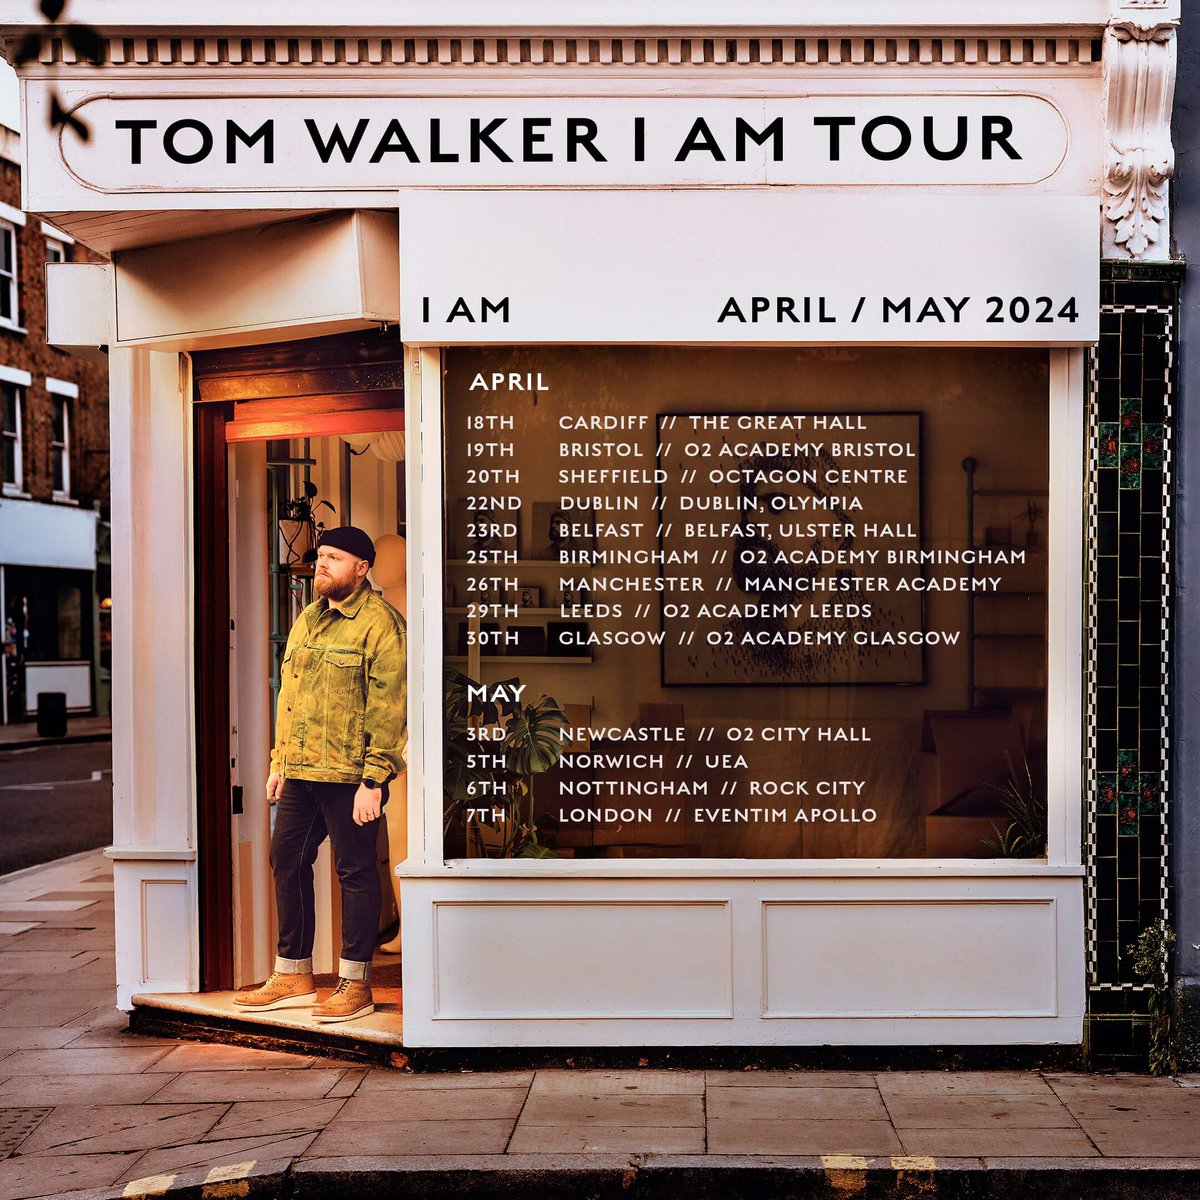 Norwich! Tonight you've got Tom Walker @IamTomWalker at @uniofeastanglia University of East Anglia - guest @KingfishrBand - tickets here >> allgigs.co.uk/view/artist/81…